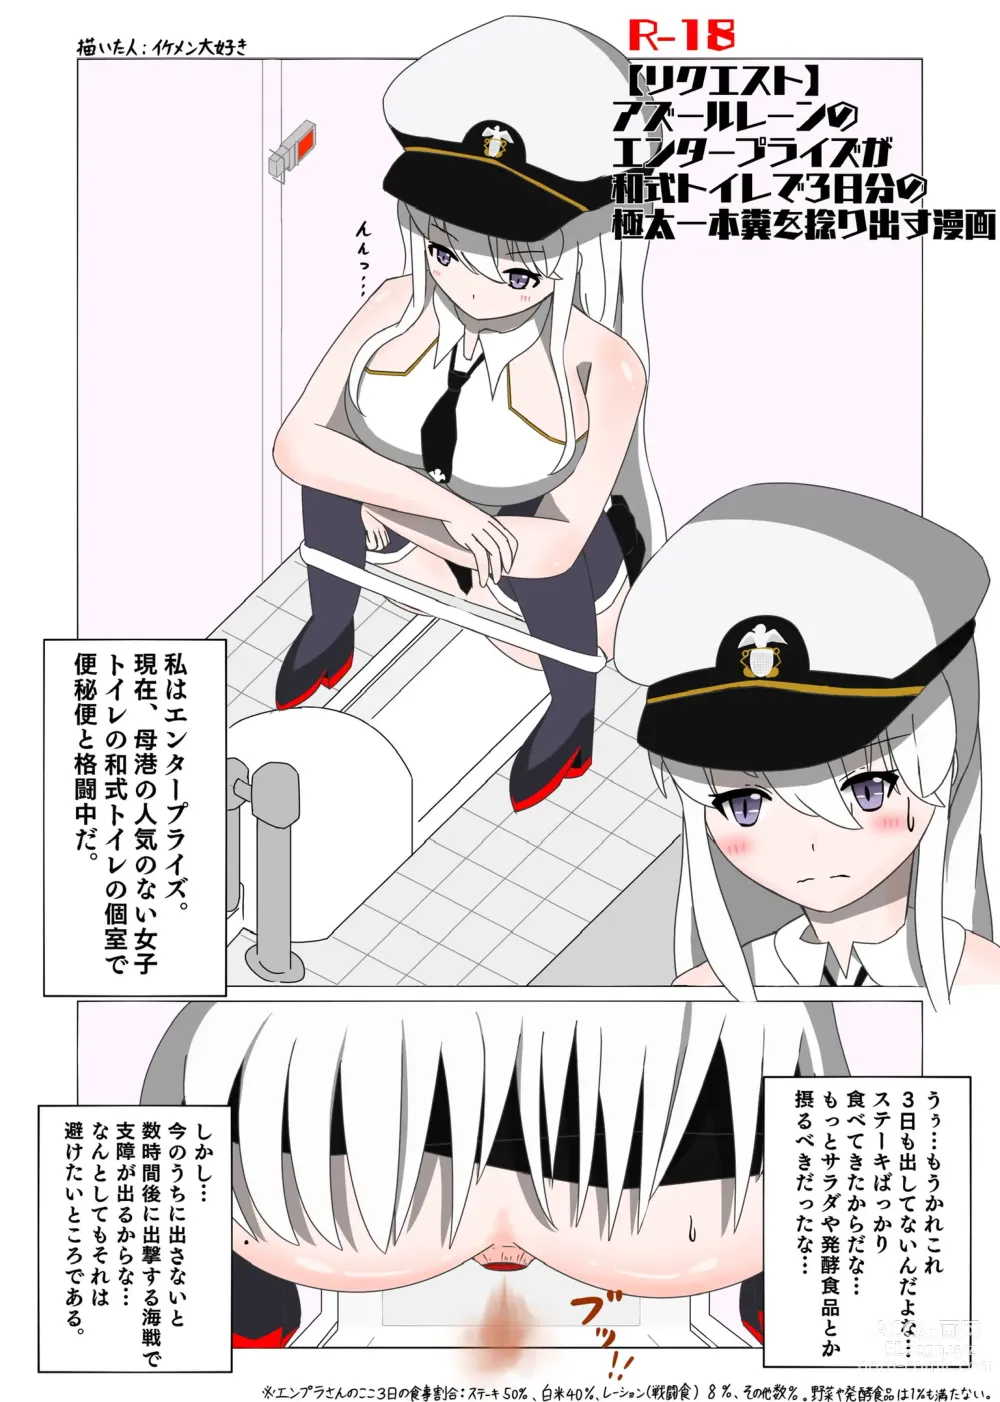 Page 1 of doujinshi A manga in which Enterprise relieves 3 days worth of poop in a Japanese-style toilet